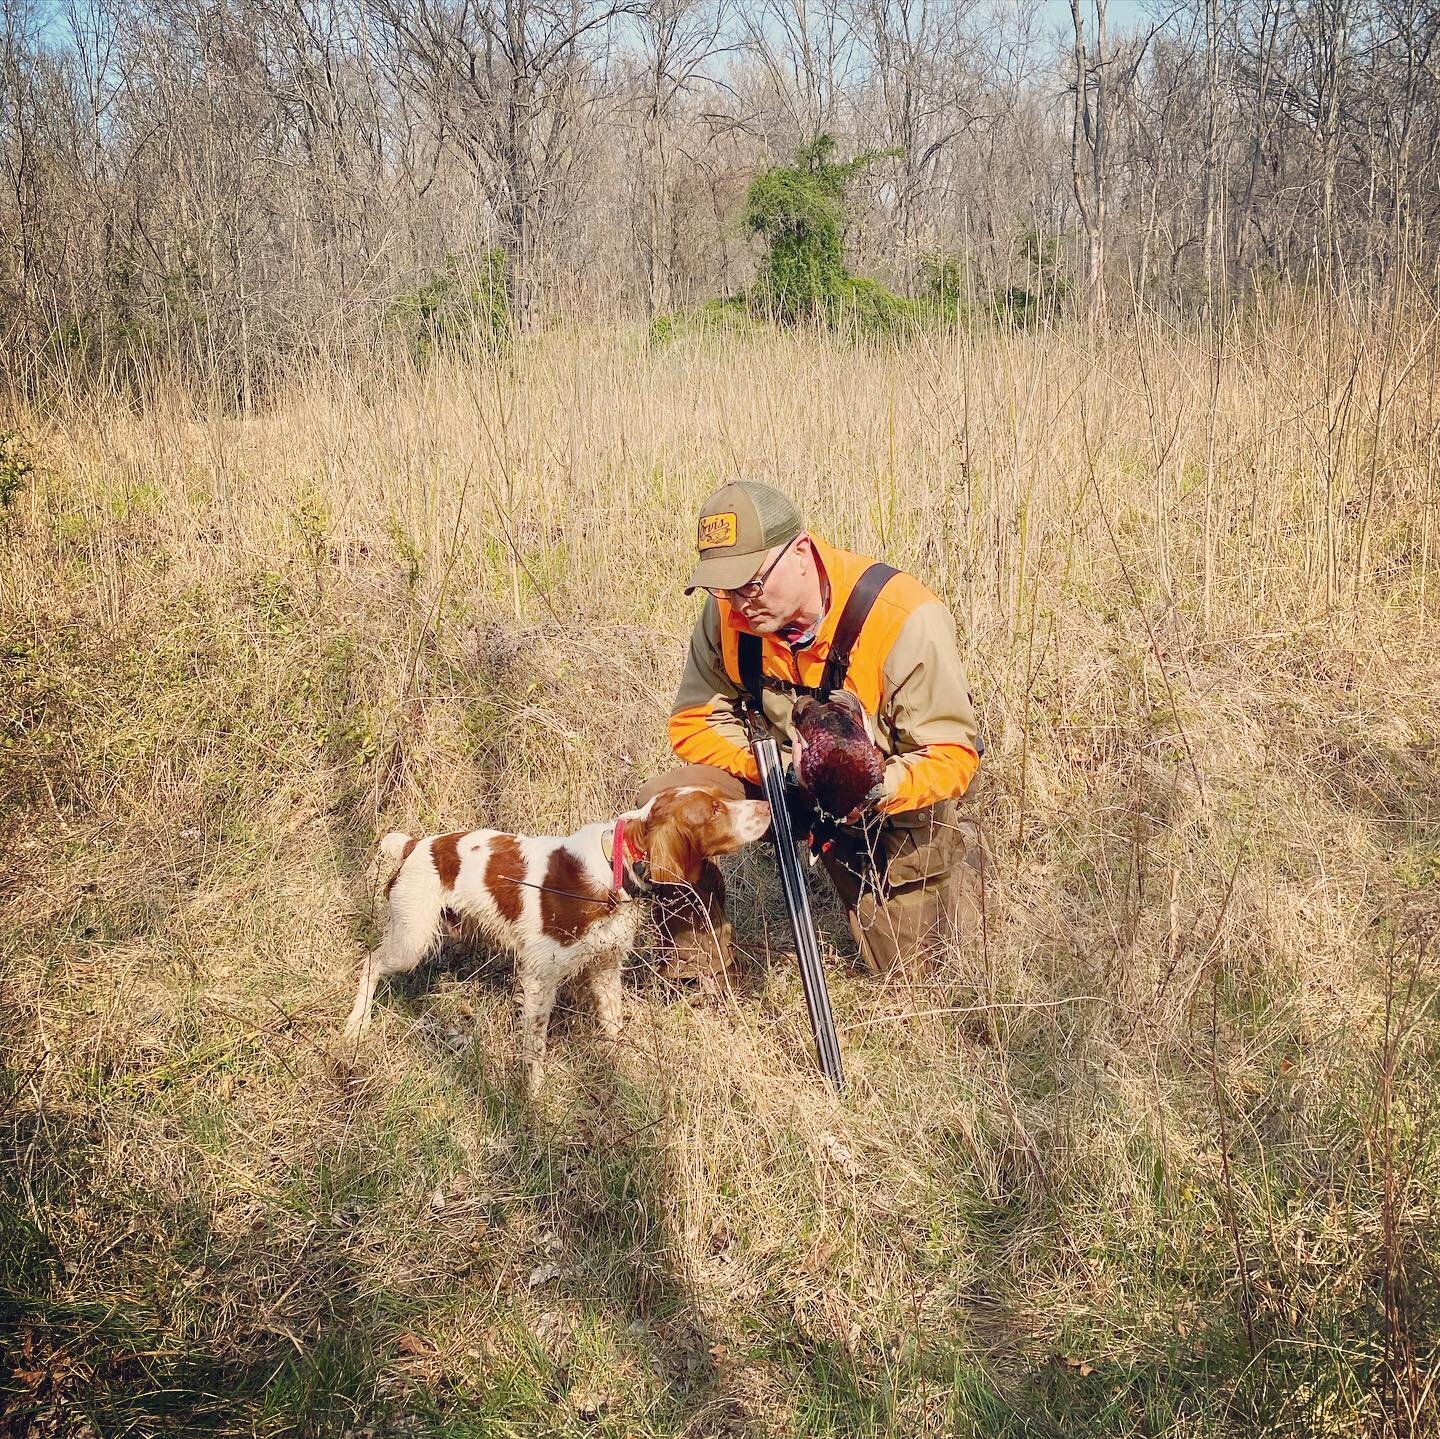 How I spent the first morning of my 50s. Think it&rsquo;s going to be a good decade &hellip; #cleanup #backcountry #dog #brittany #americanbrittany #virginiabrittany #brittanysofinsta #brittanysofinstagram #birddog #birddogs #birddogsofinstagram #bir